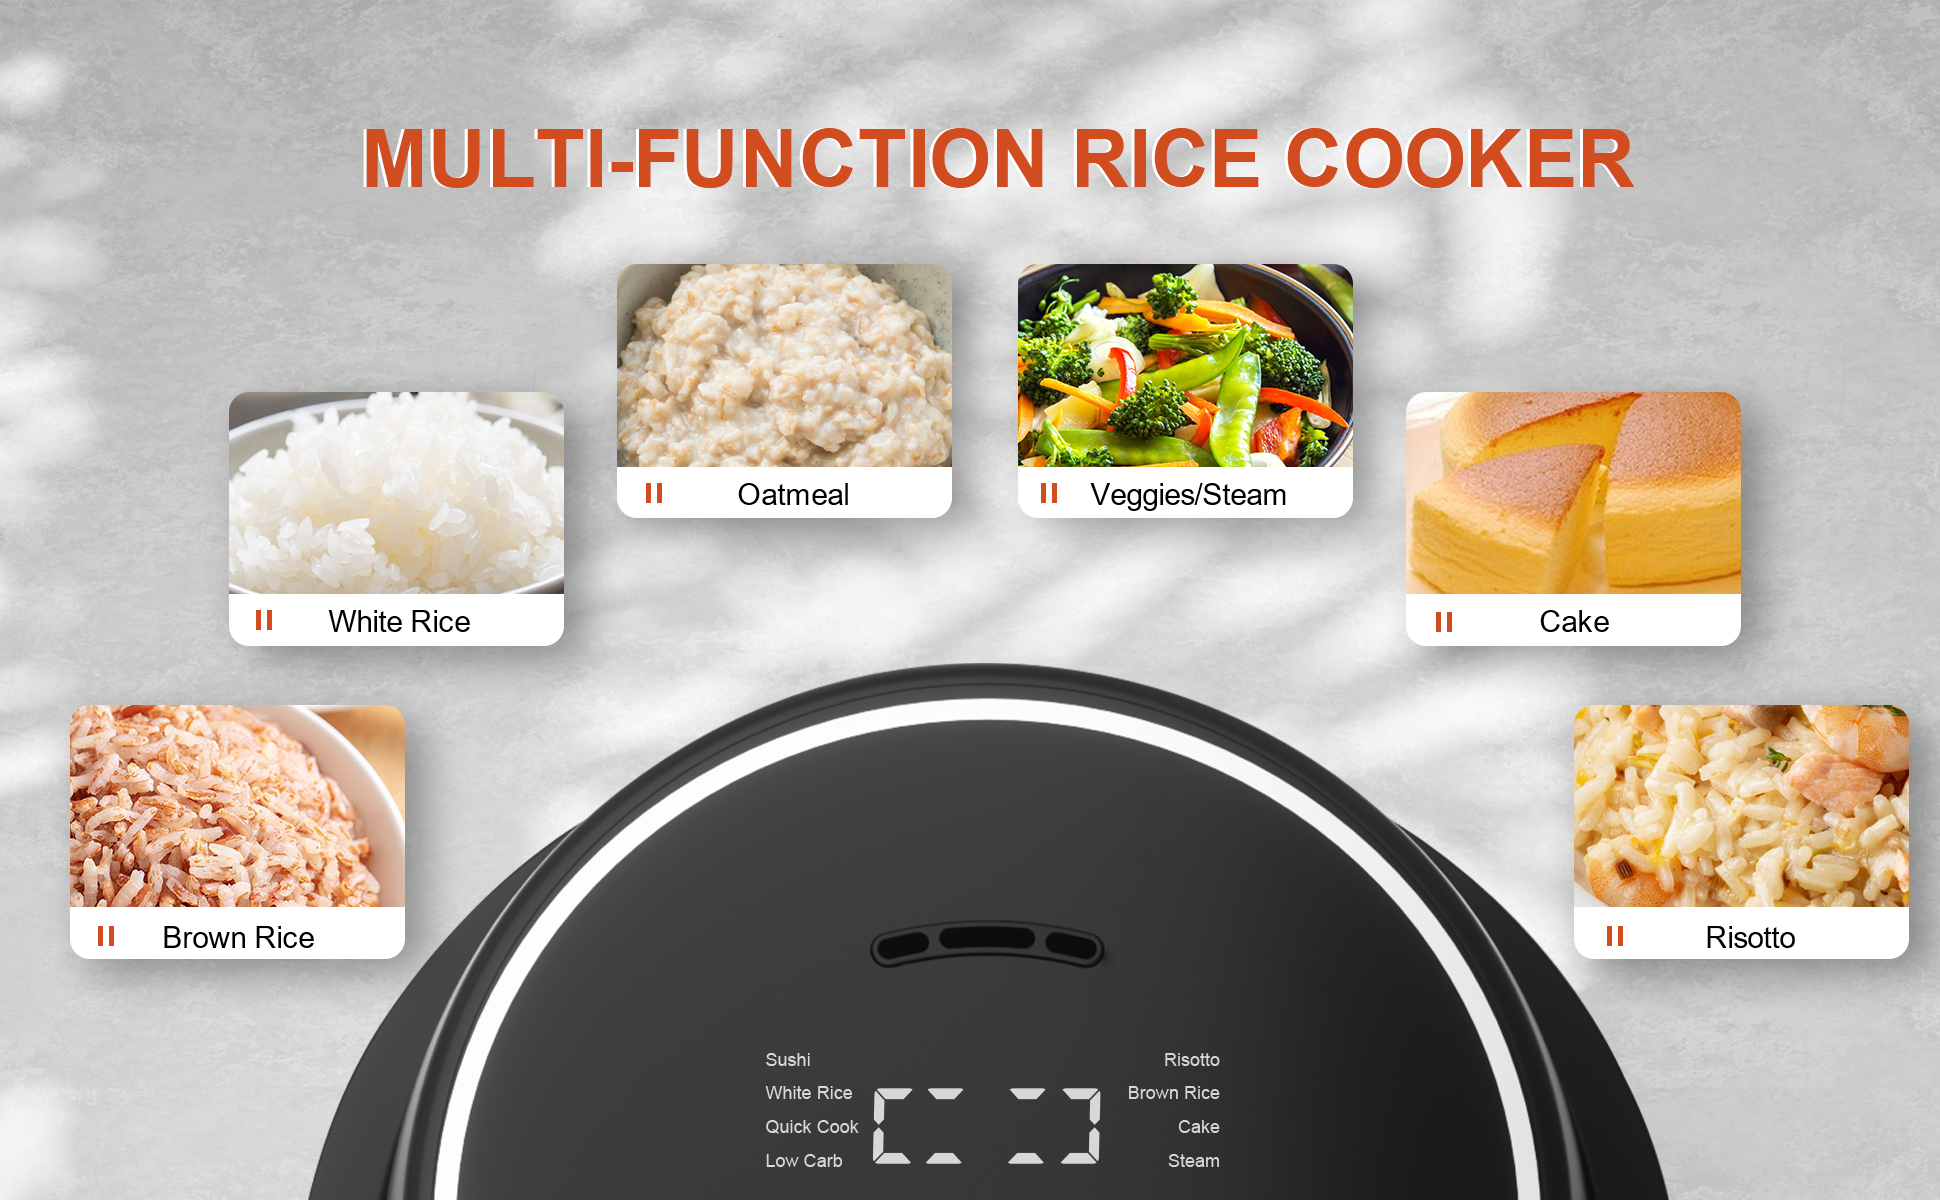 Rice Cooker Small Low Carb, 6-cup (cooked)Rice Maker, 8-in-1 Rice